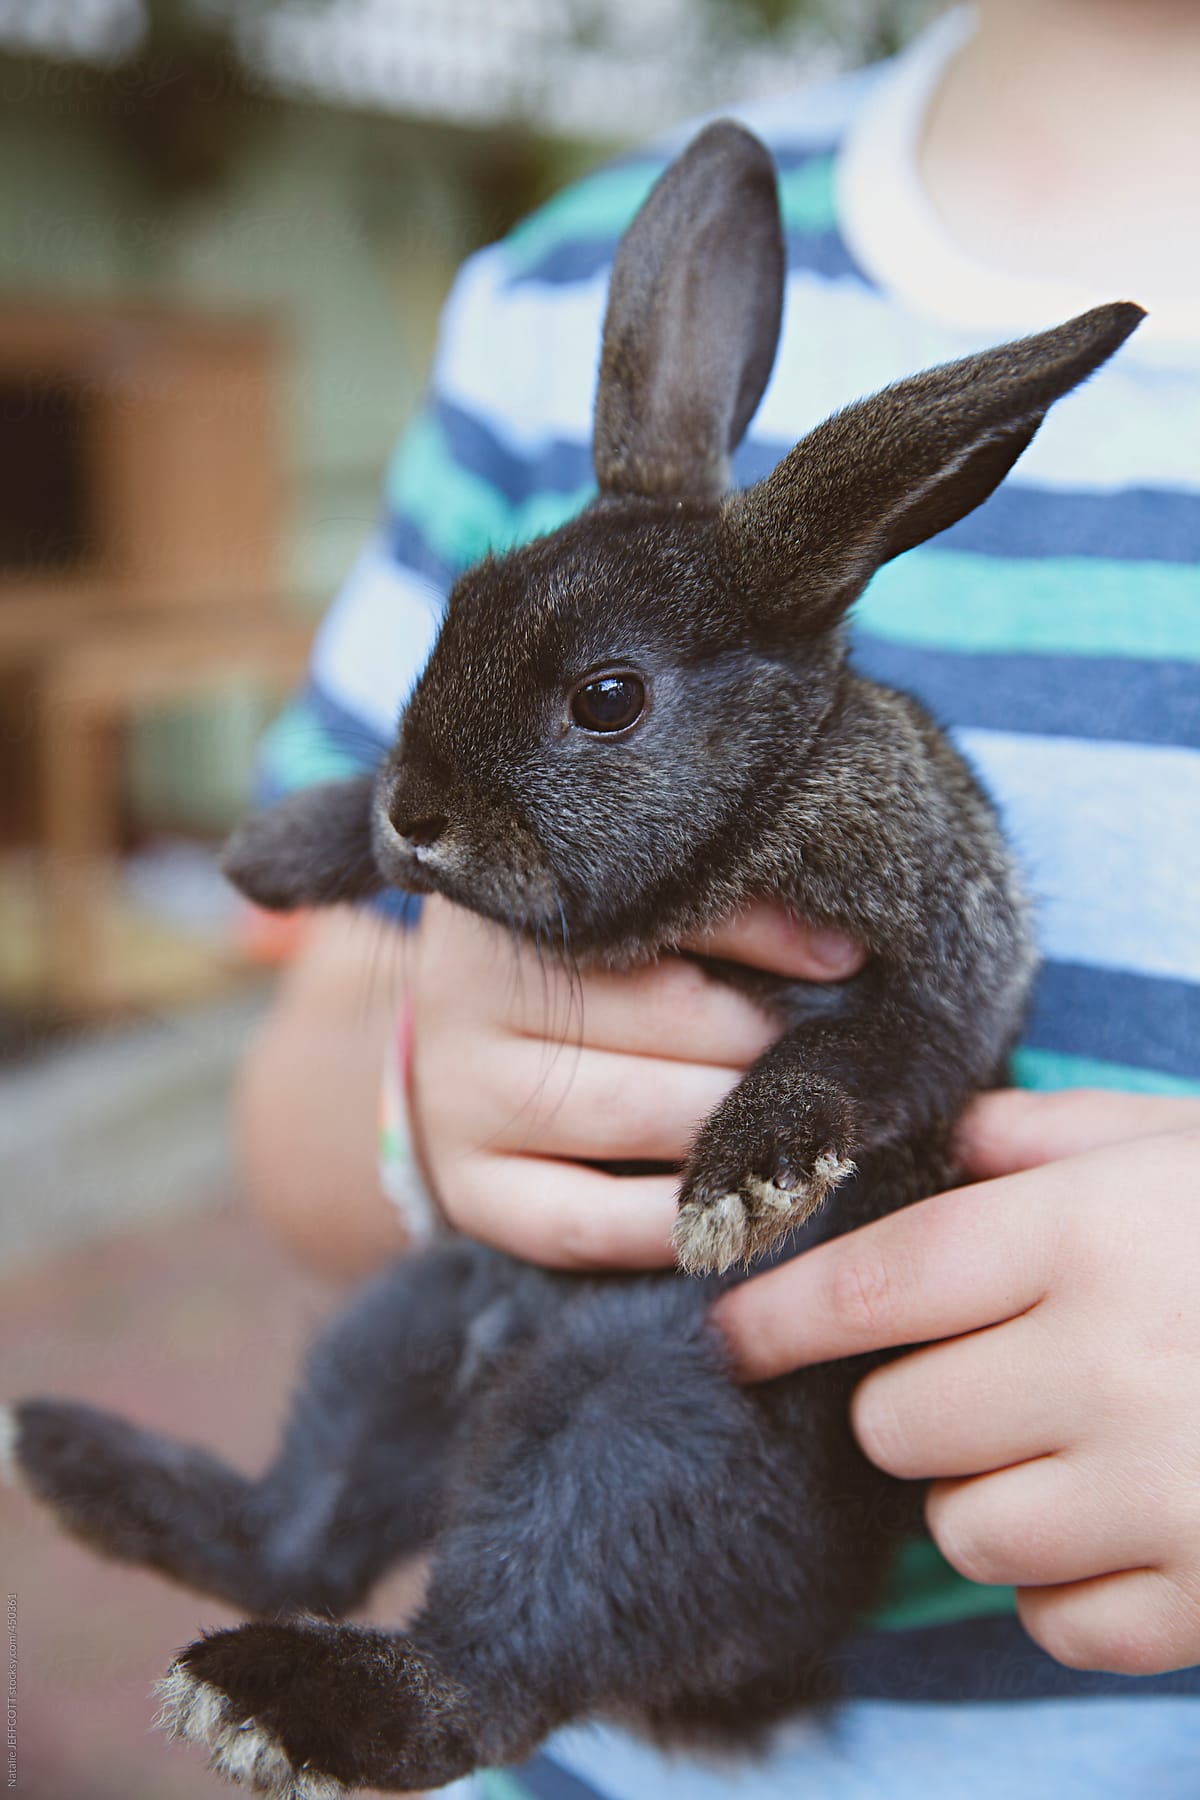 A  young boy gets a baby rabbit for a new pet